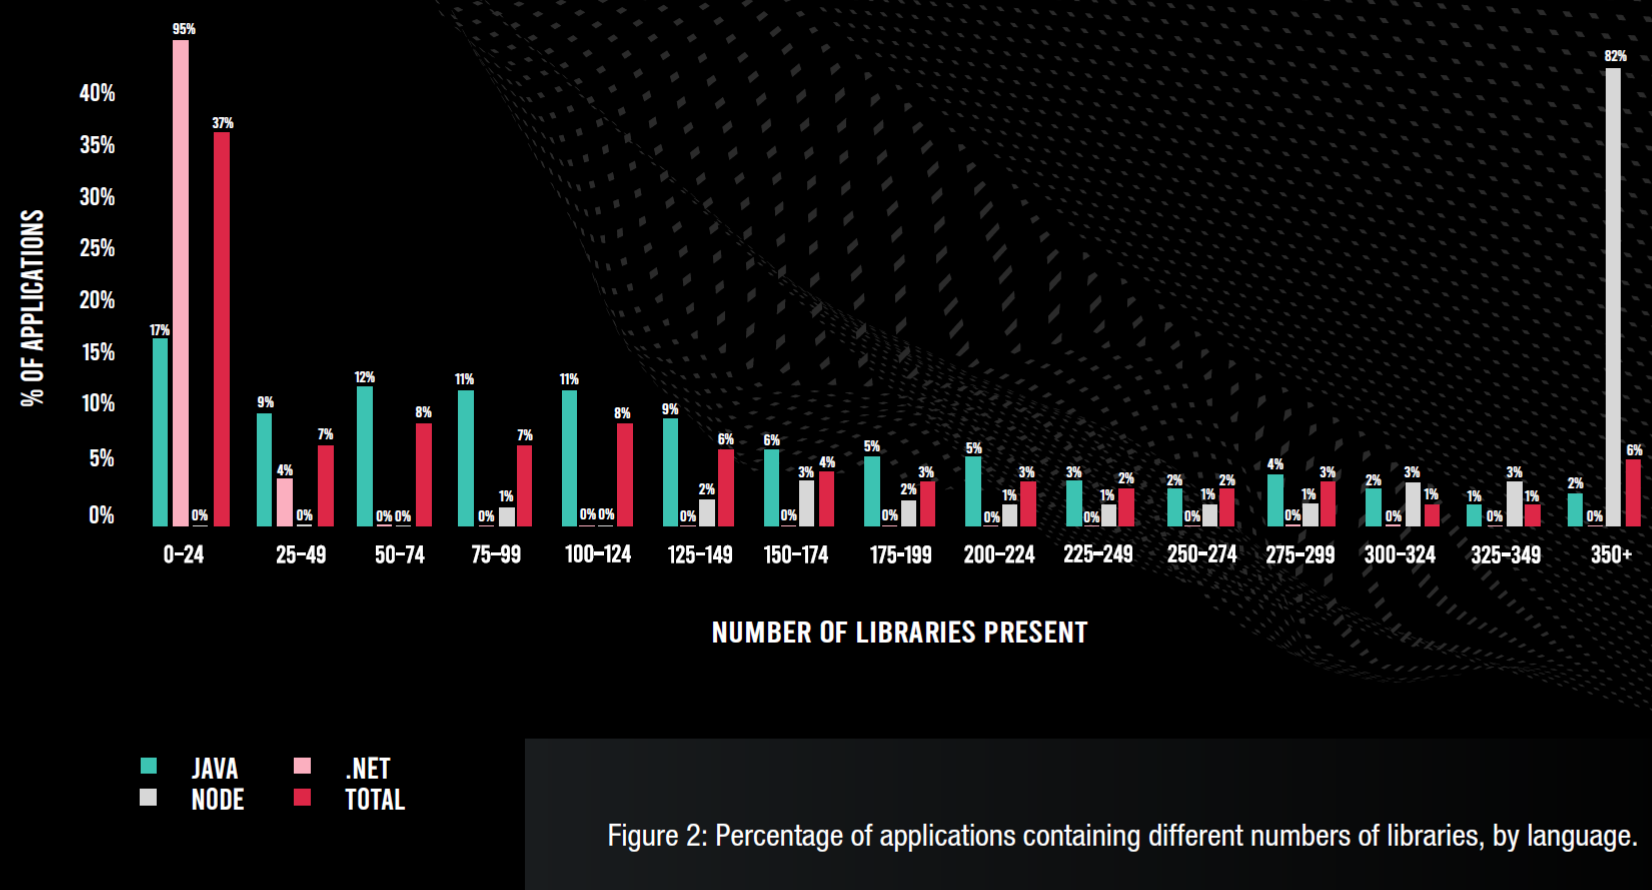 Percentage of applications containing different numbers of libraries, by language